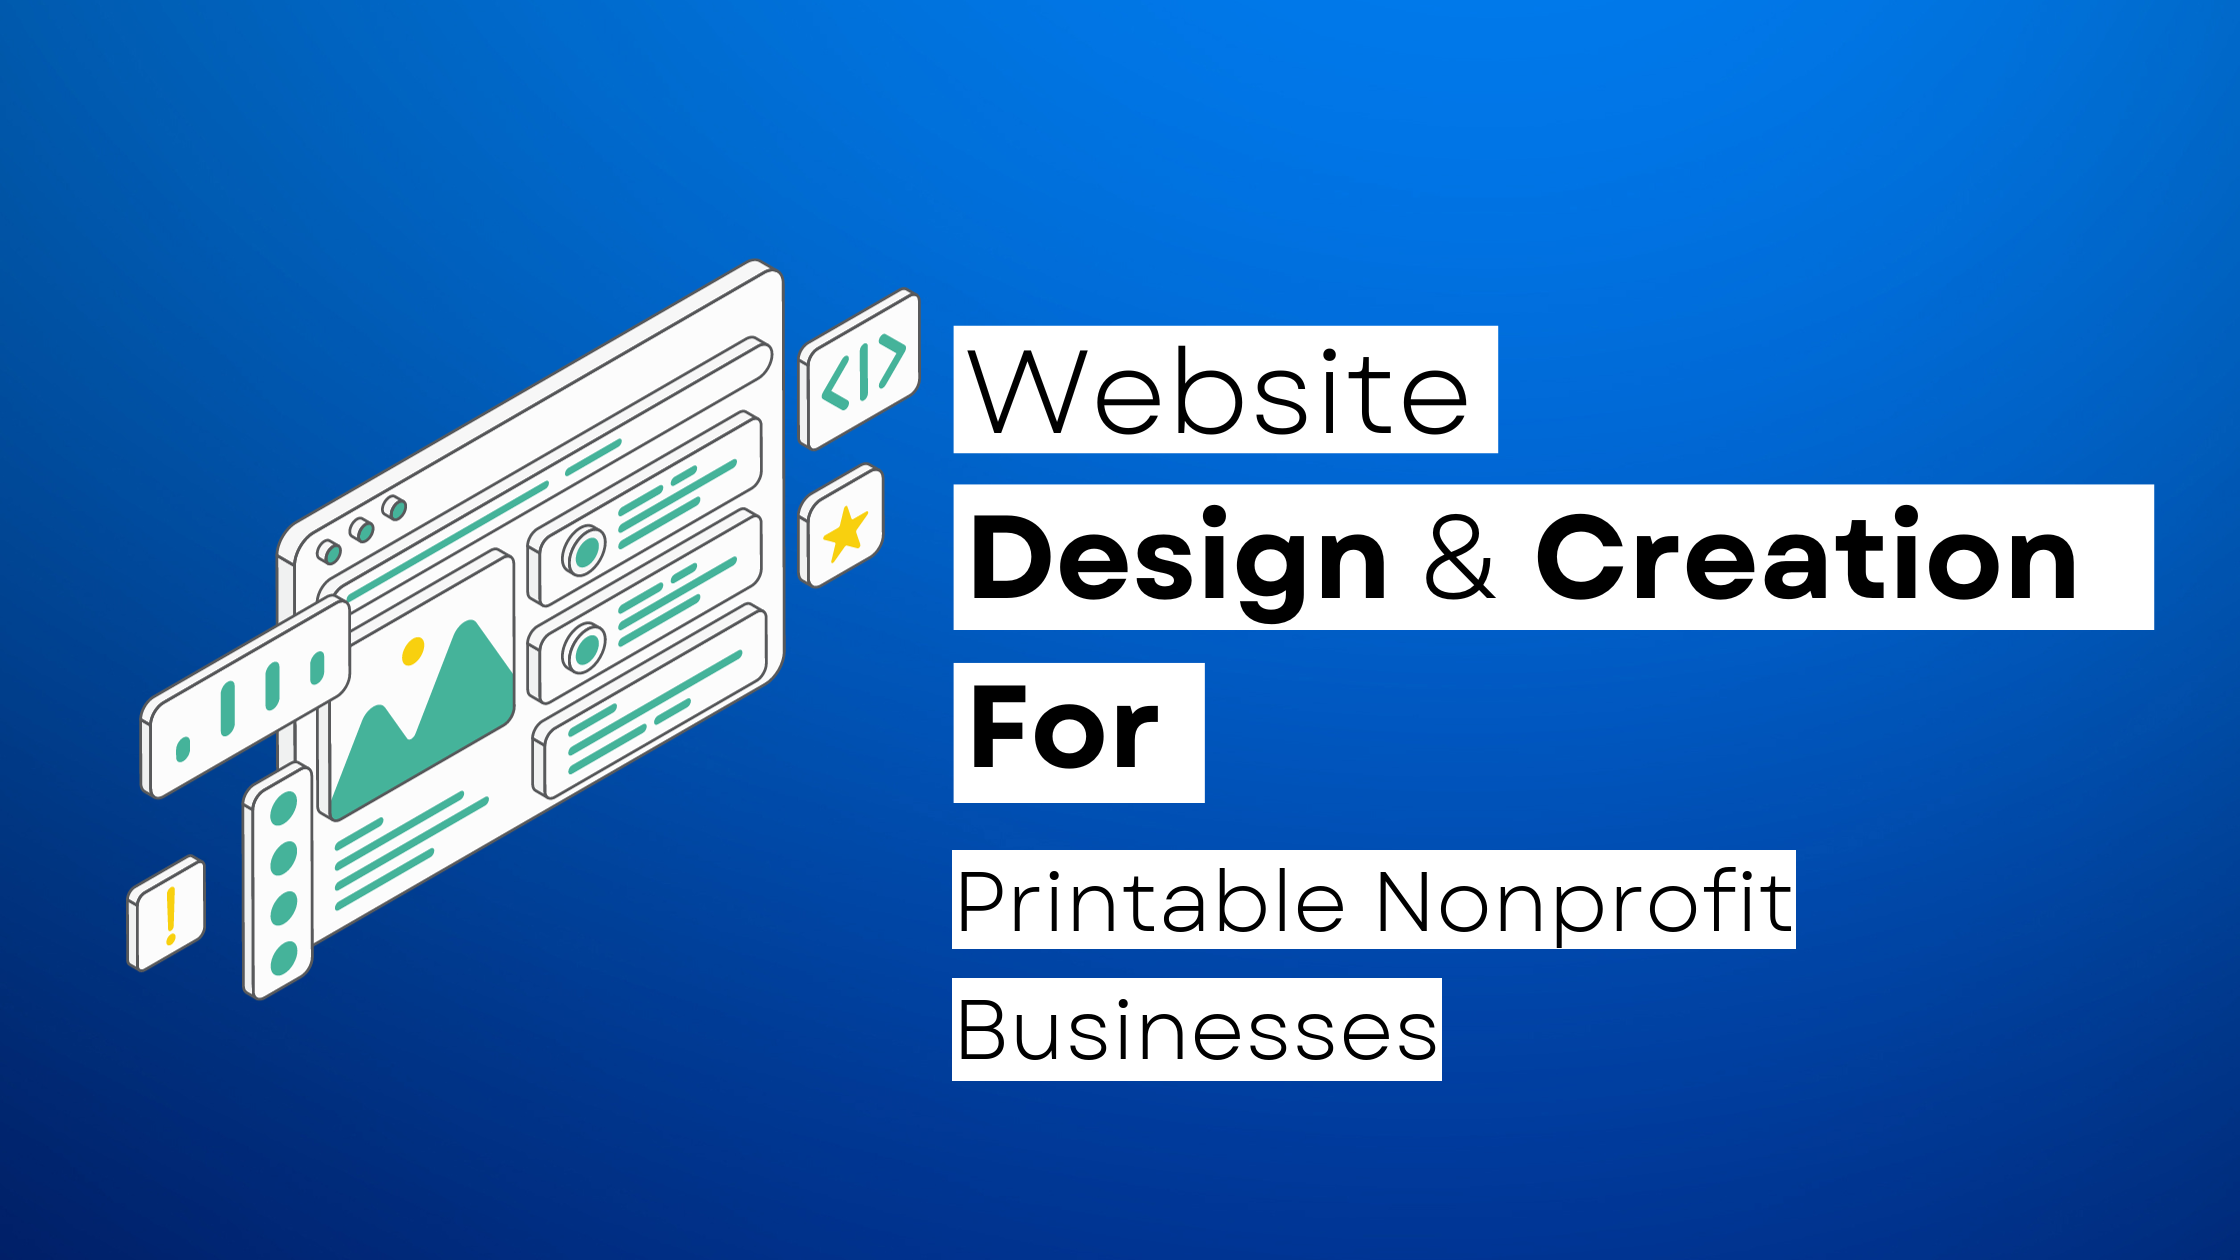 How to start a Printable Nonprofit website